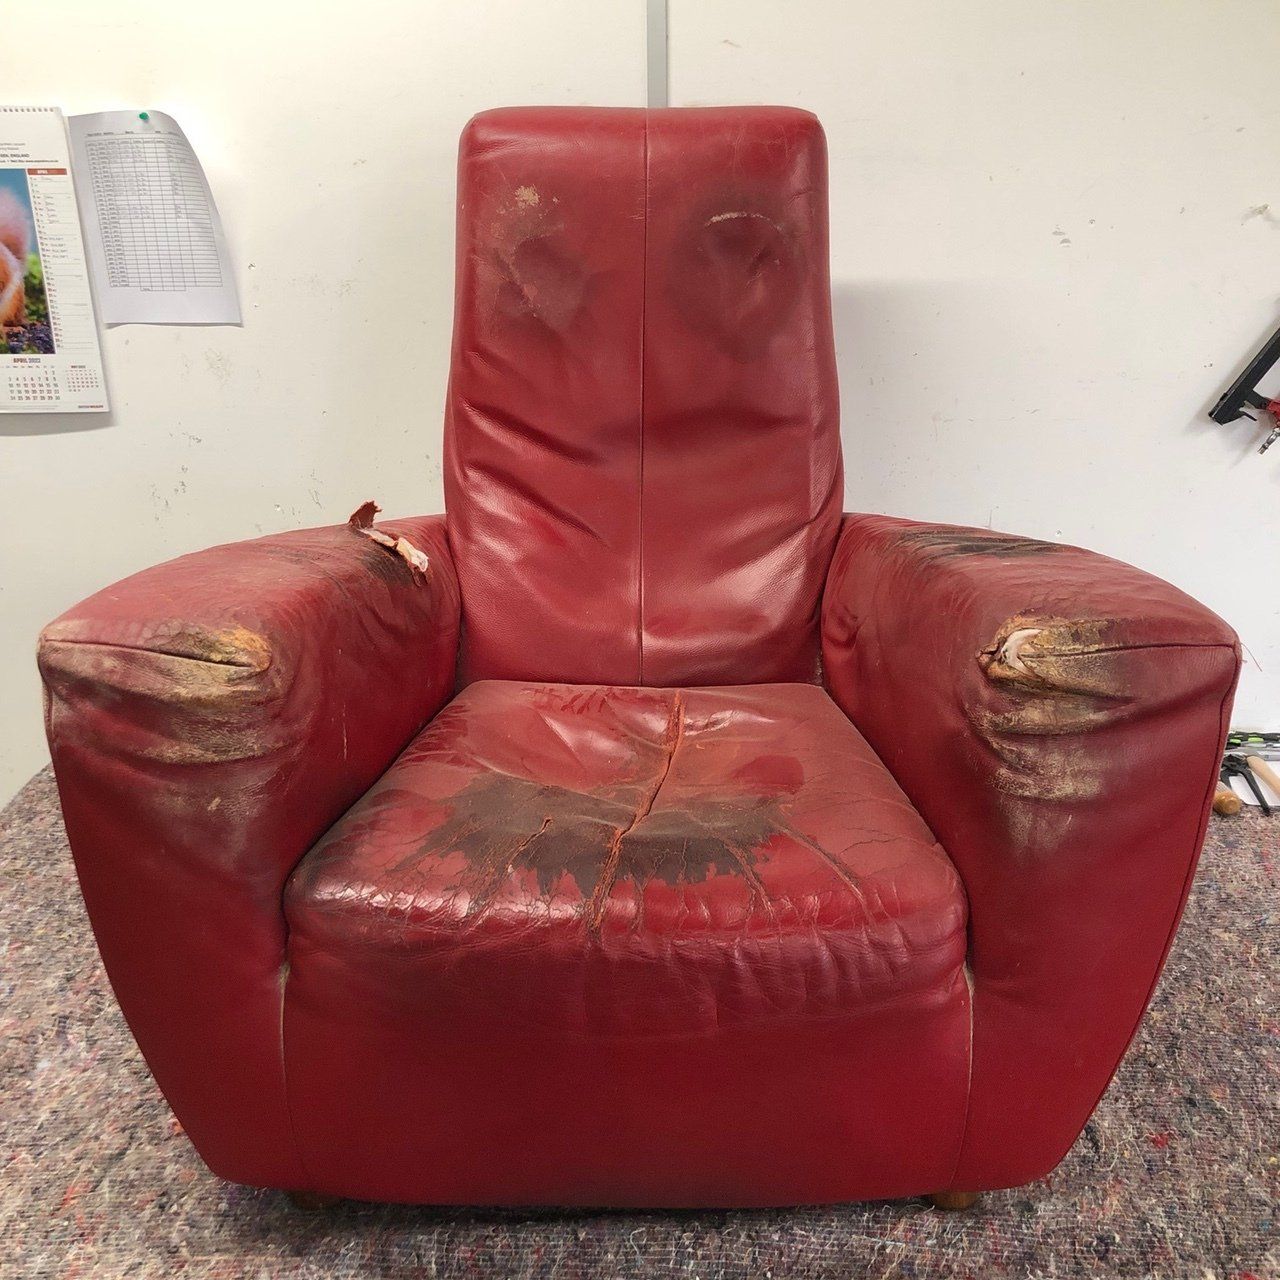 Scruffy big red leather armchair before